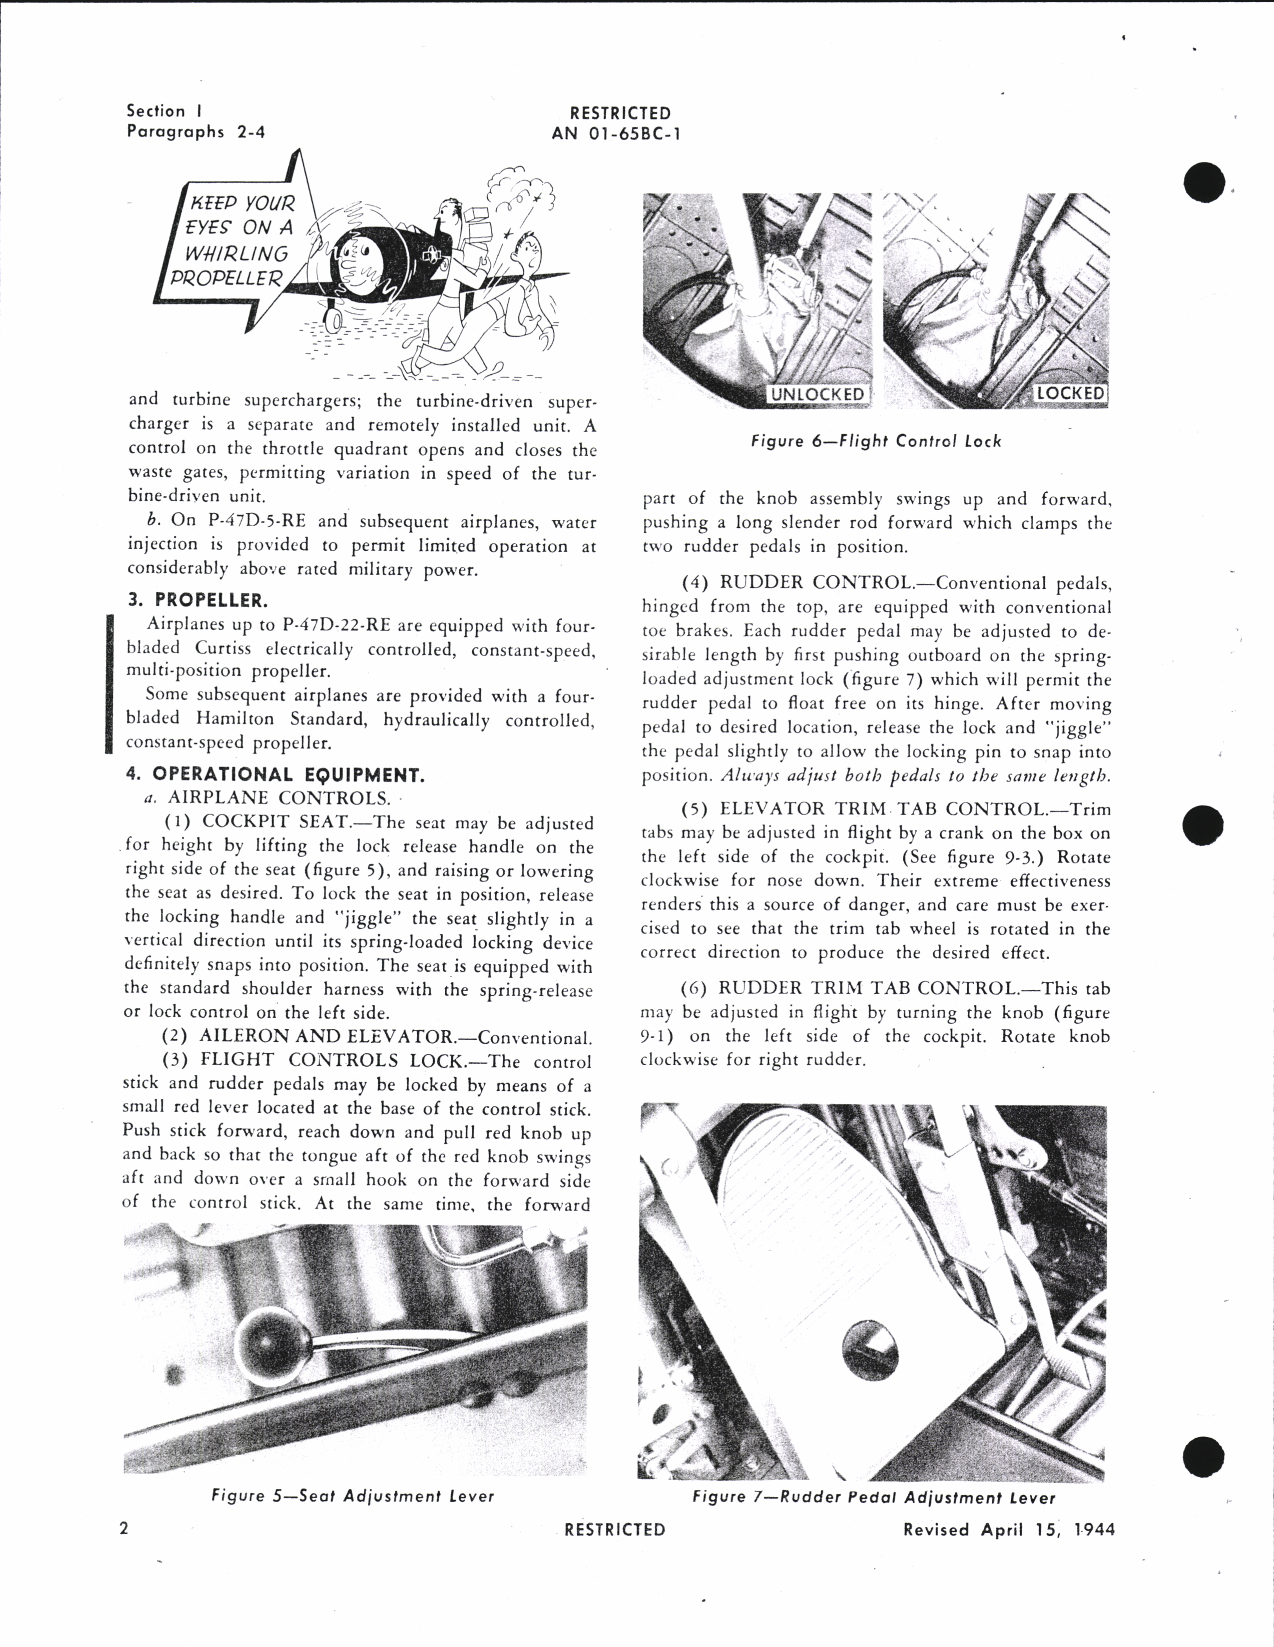 Sample page 6 from AirCorps Library document: Pilot's Flight Operating Instructions for RP-47B, RP-47C, P-47G, and P-47D